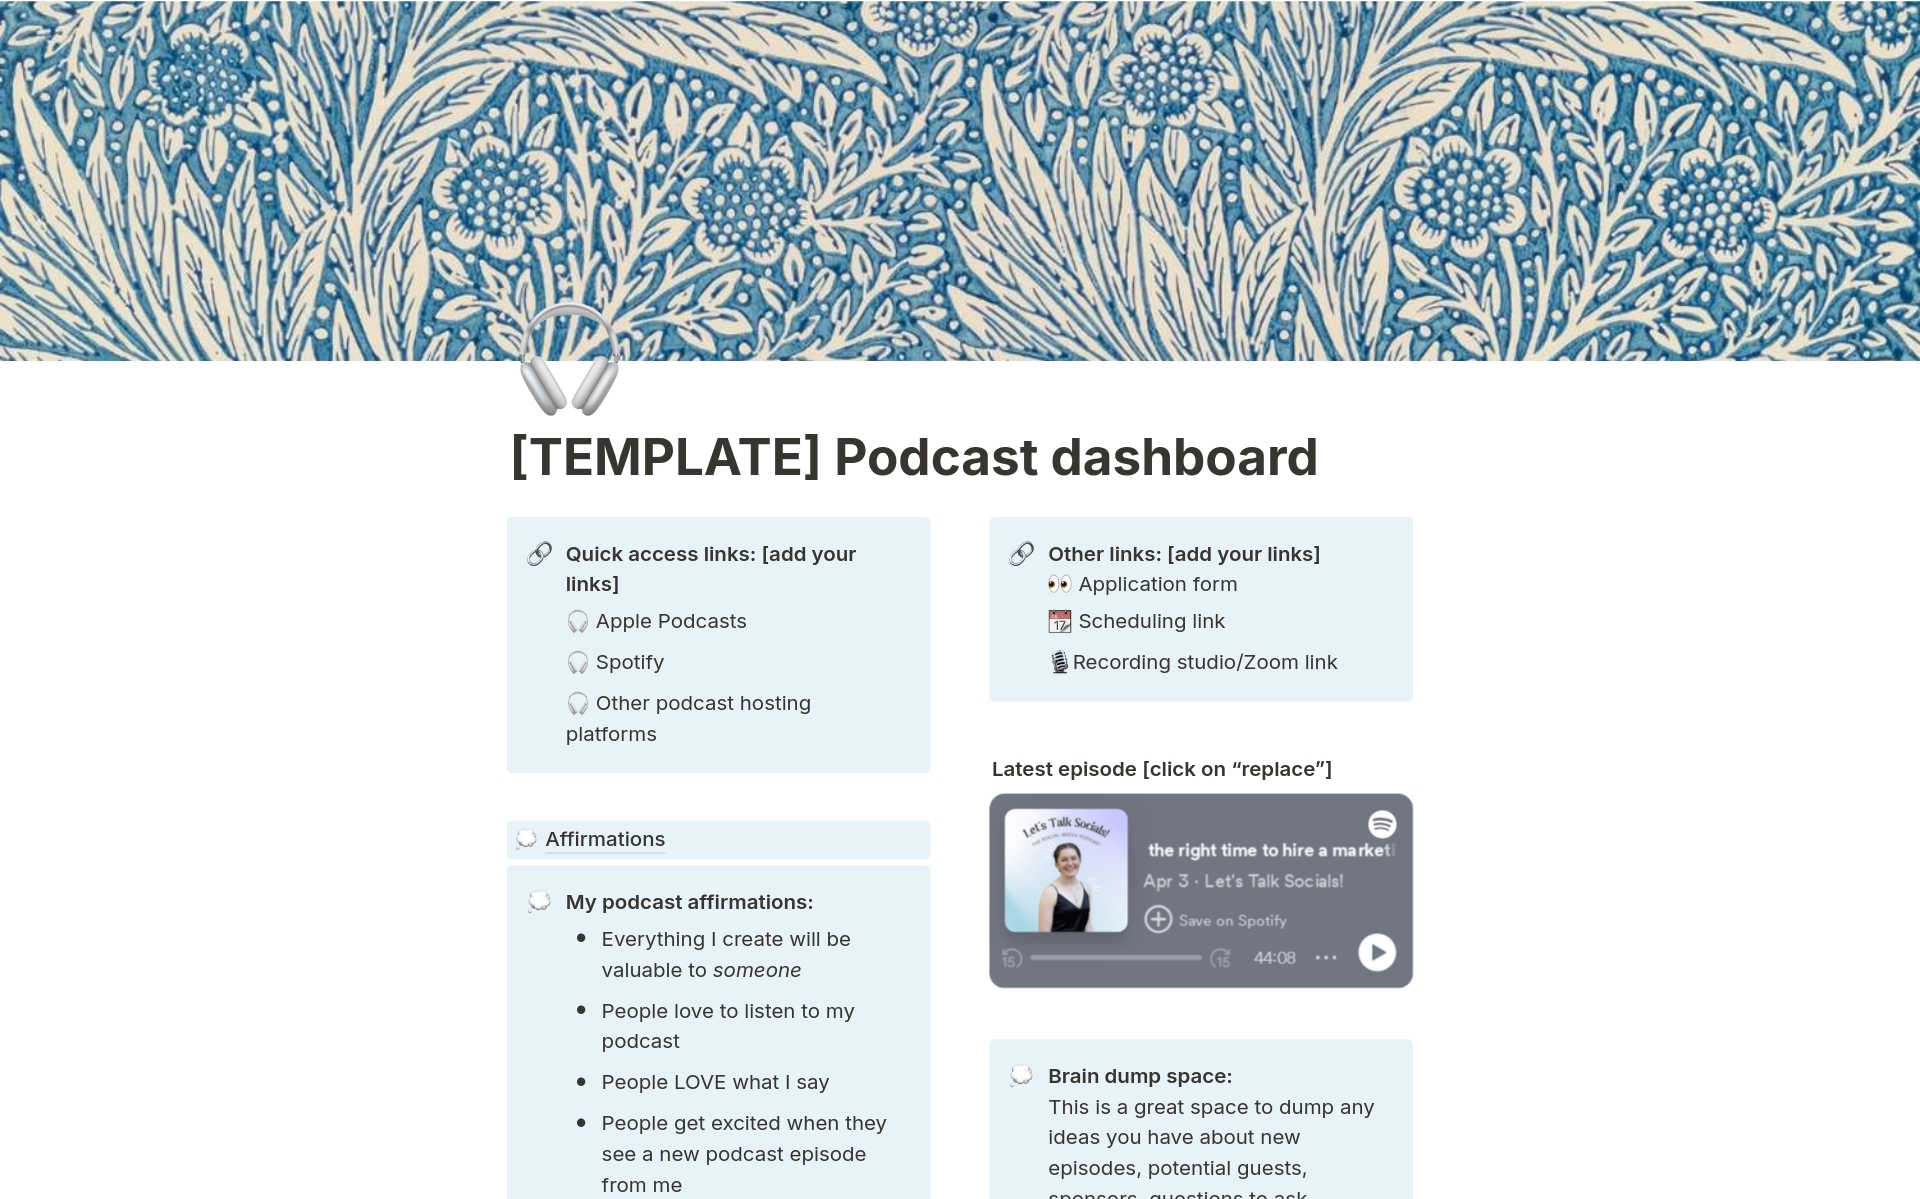 Access my podcast template to streamline your production process and keep track of your episodes, guests & more.
"Your whole podcast process is *chef's kiss* - from start to finish!" - a recent podcast guest